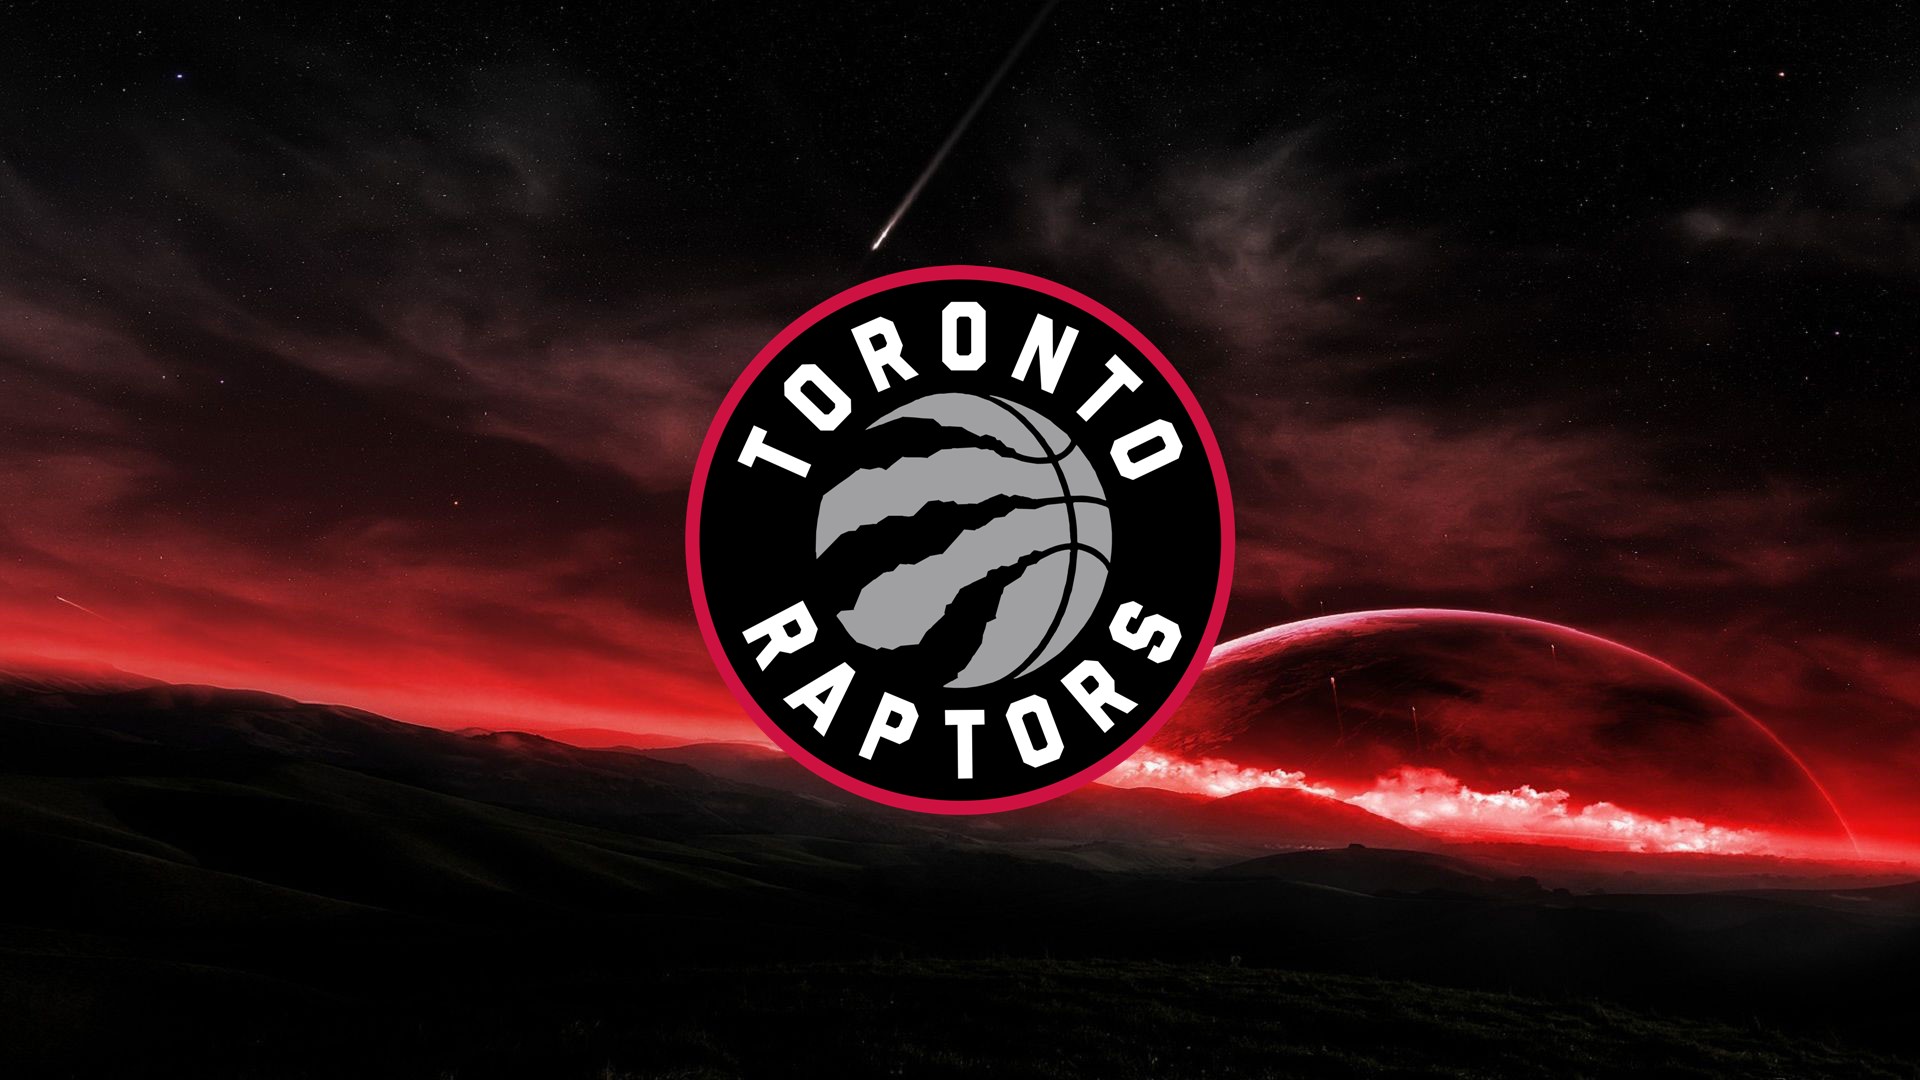 Basketball Toronto HD Wallpapers with image dimensions 1920x1080 pixel. You can make this wallpaper for your Desktop Computer Backgrounds, Windows or Mac Screensavers, iPhone Lock screen, Tablet or Android and another Mobile Phone device